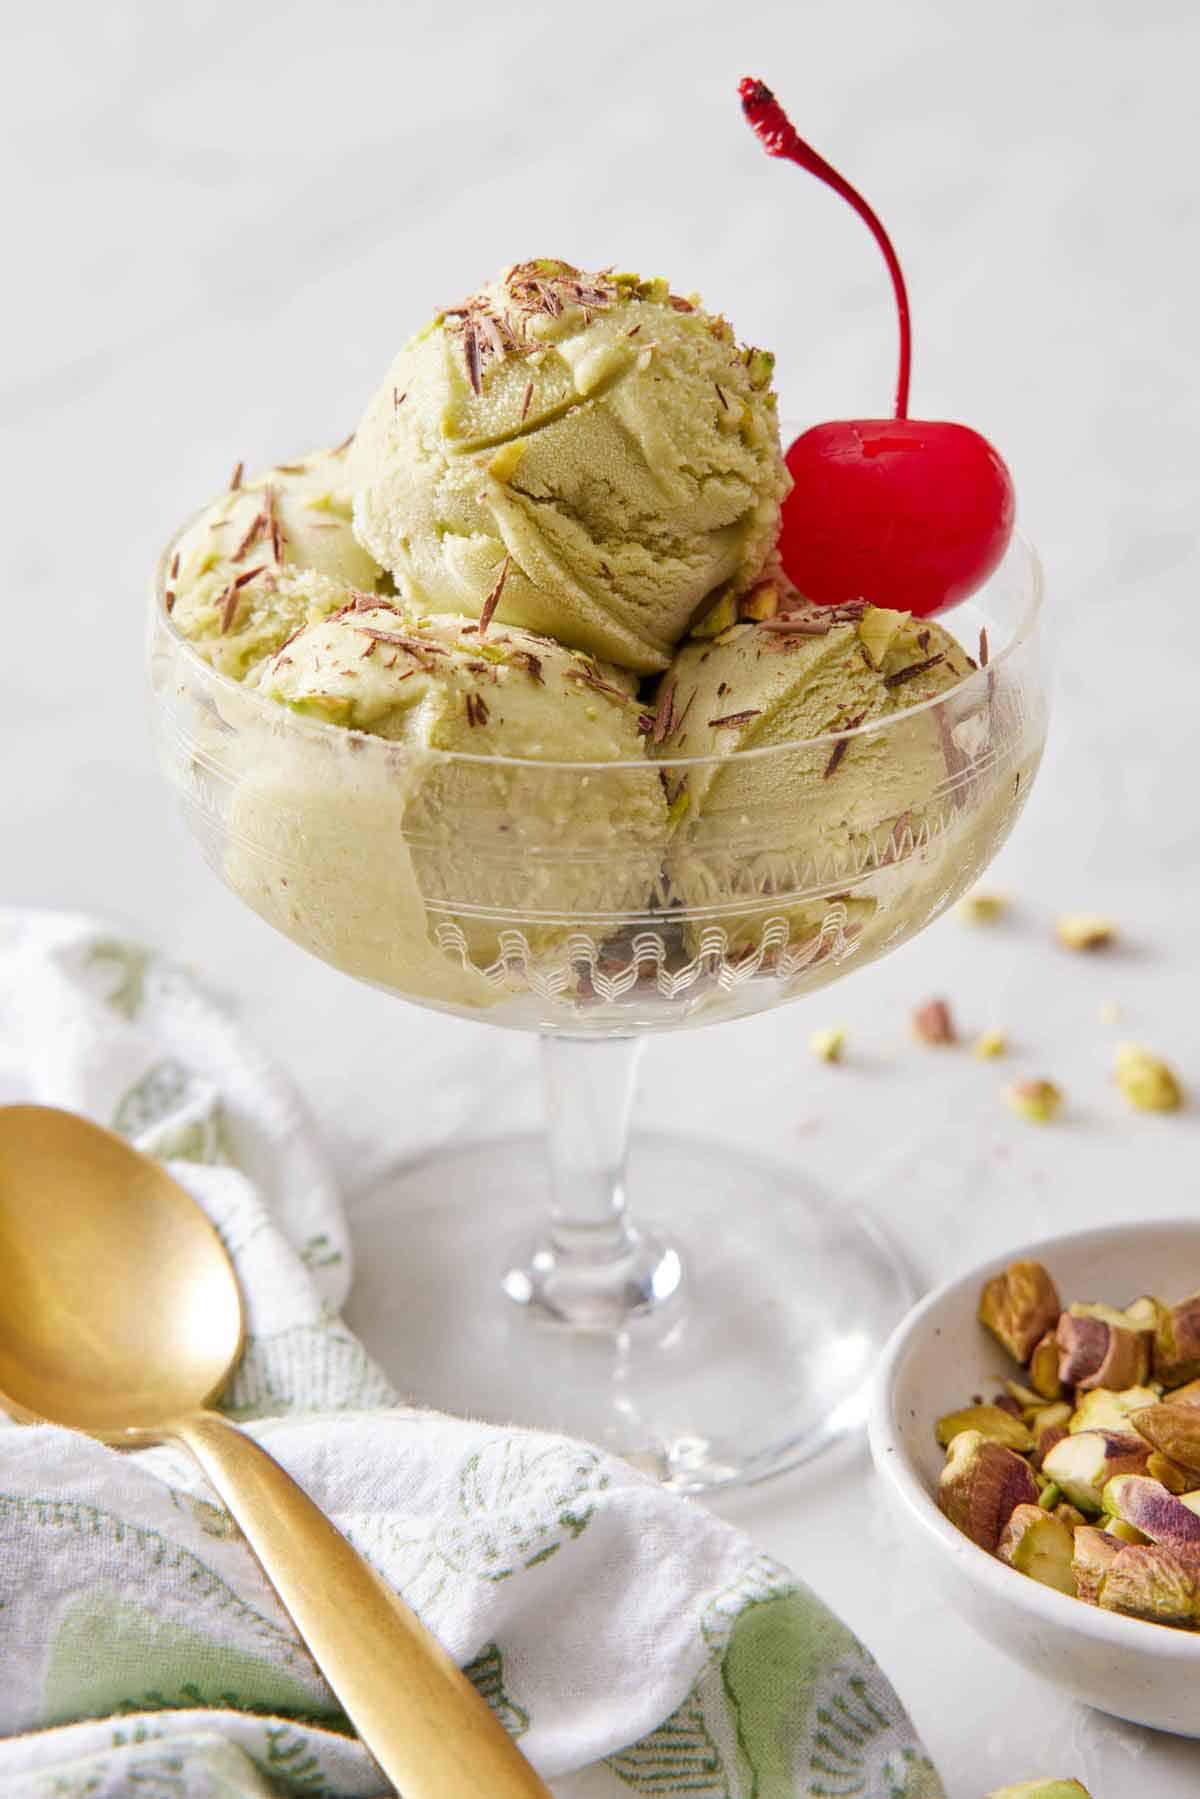 An ice cream serving bowl with multiple scoops of pistachio ice cream with a cherry.